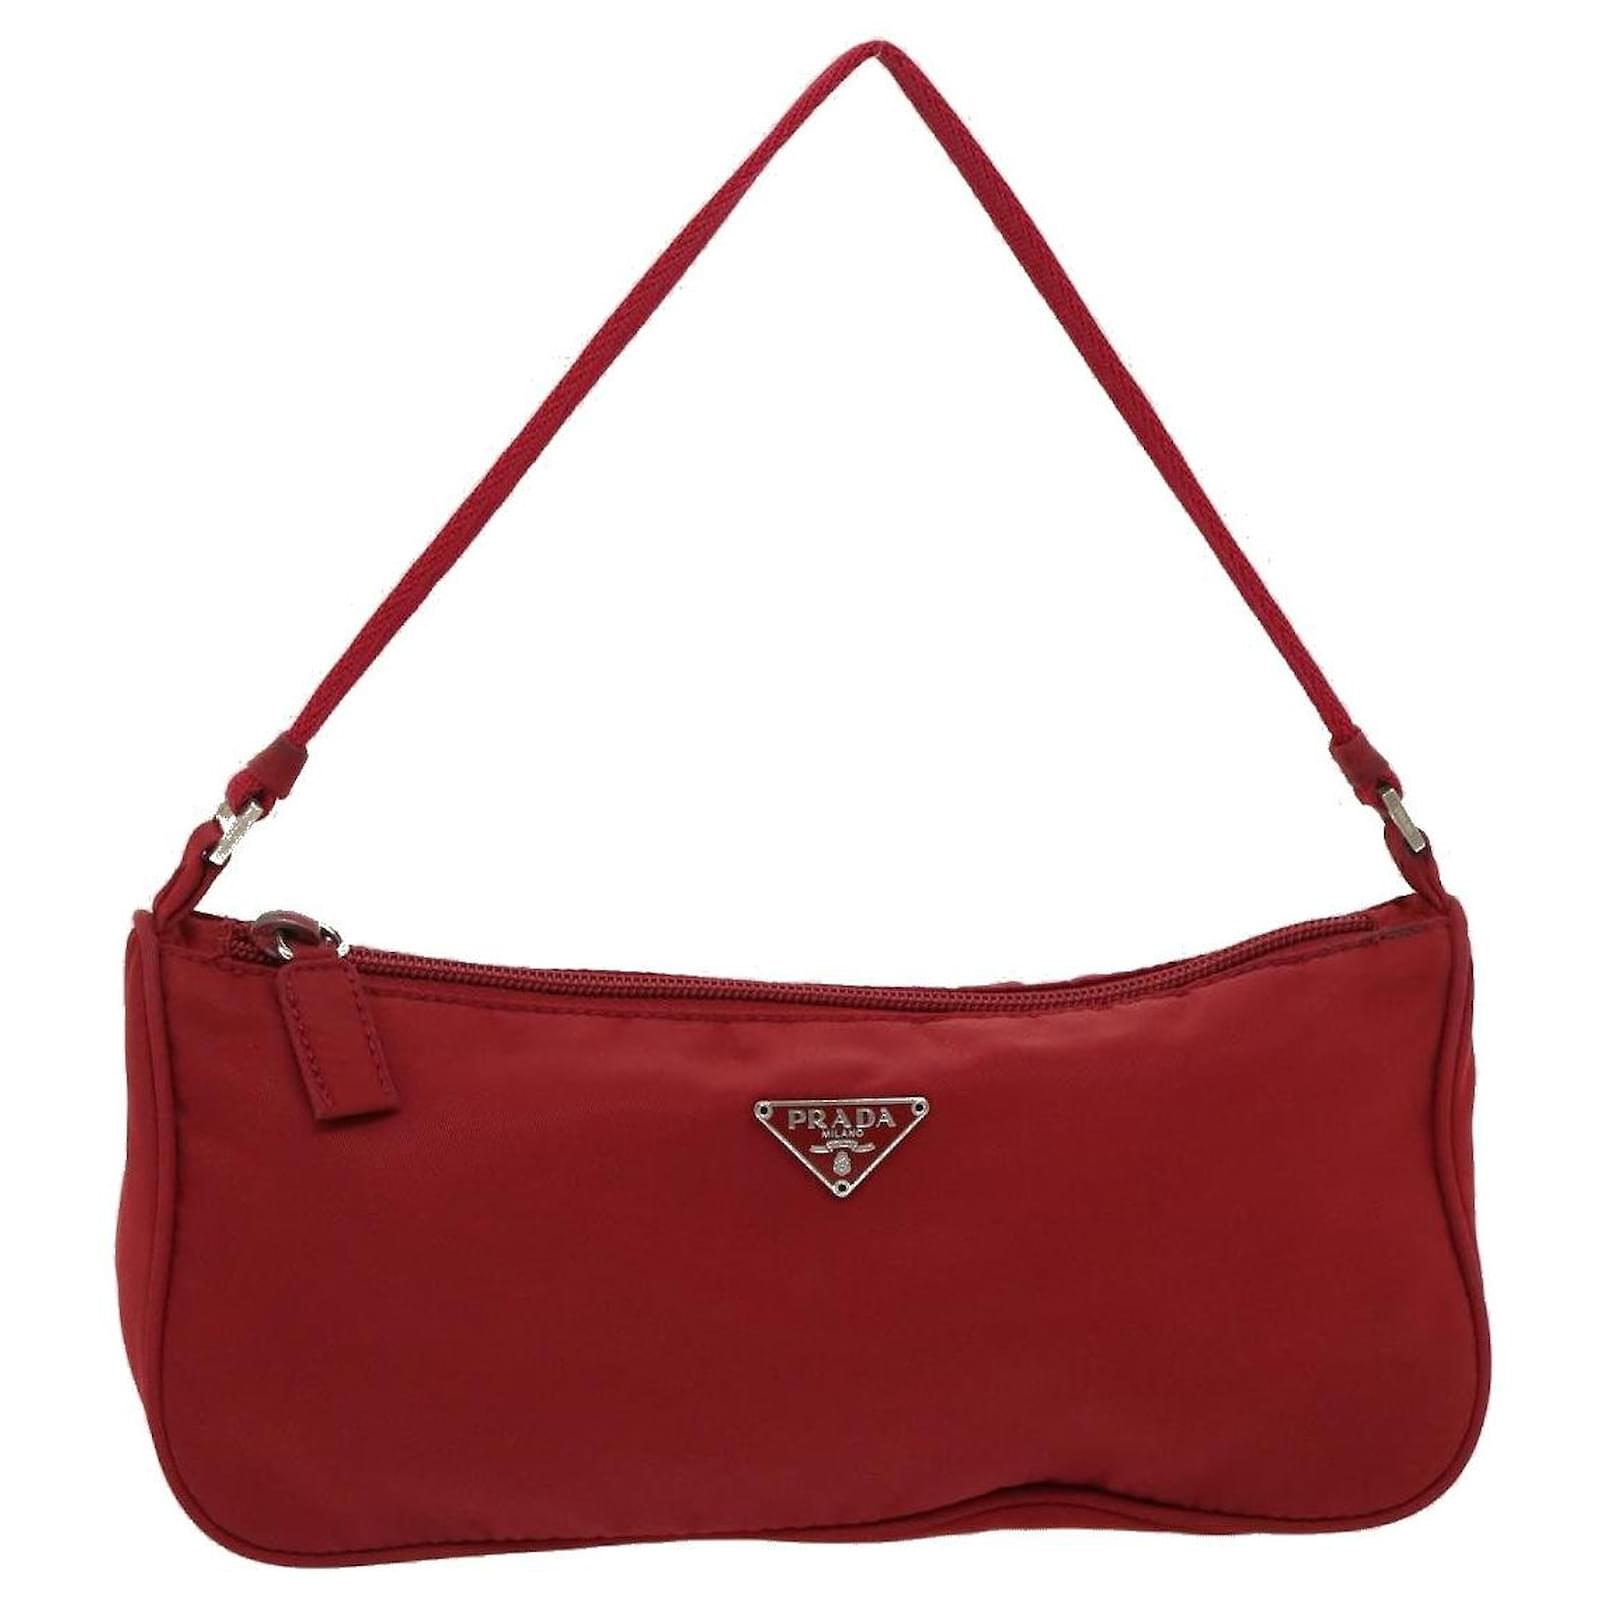 Prada | Bags | Prada Fiery Red Saffiano And Leather Wallet With Shoulder  Strap | Poshmark